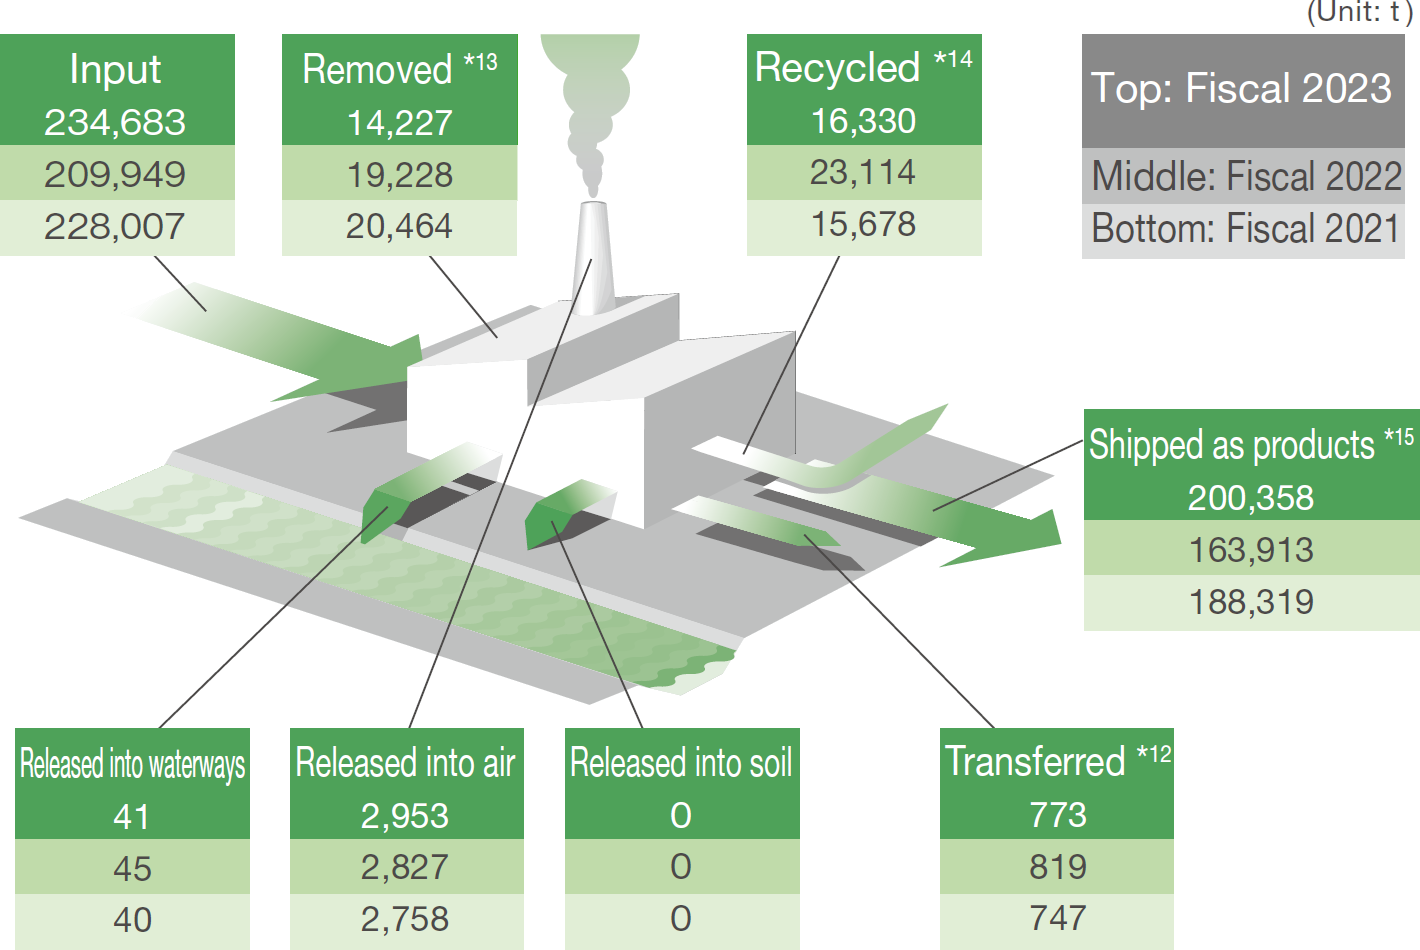 Material balance of substances in the management rank. In fiscal 2023 input: 234,683 tons, removed*13: 14,227 tons, Released into waterways: 41 tons, Released into air: 2,953 tons, Released into soil: 0 ton, Recycled*14: 16,330 tons, transferred*12: 773 tons, and Shipped as products*15: 200,358 tons.